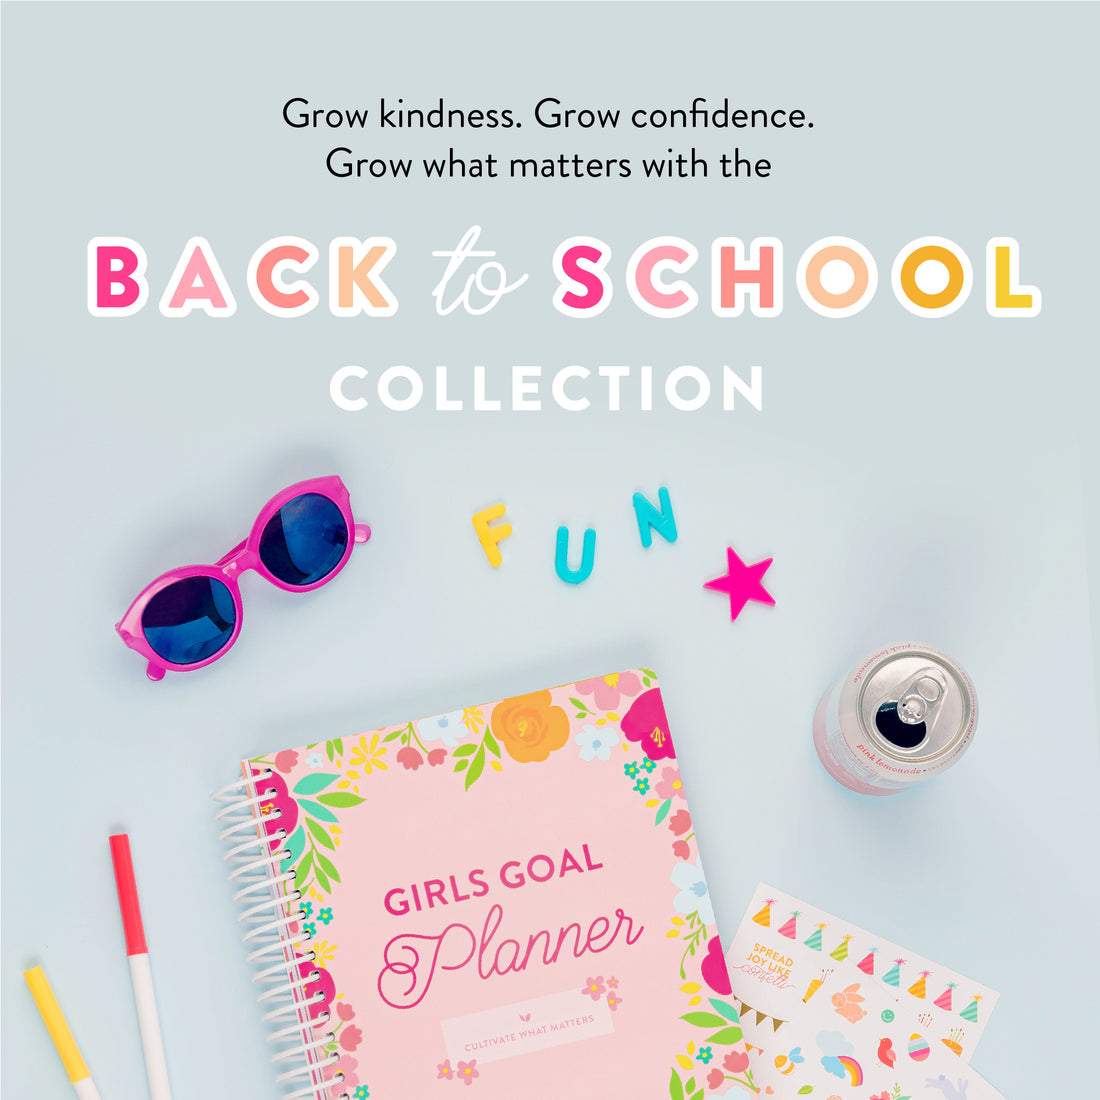 A Growth-Mindset Activity Book for Your Favorite Pre-Teen Girl: The Girls Goal Planner!